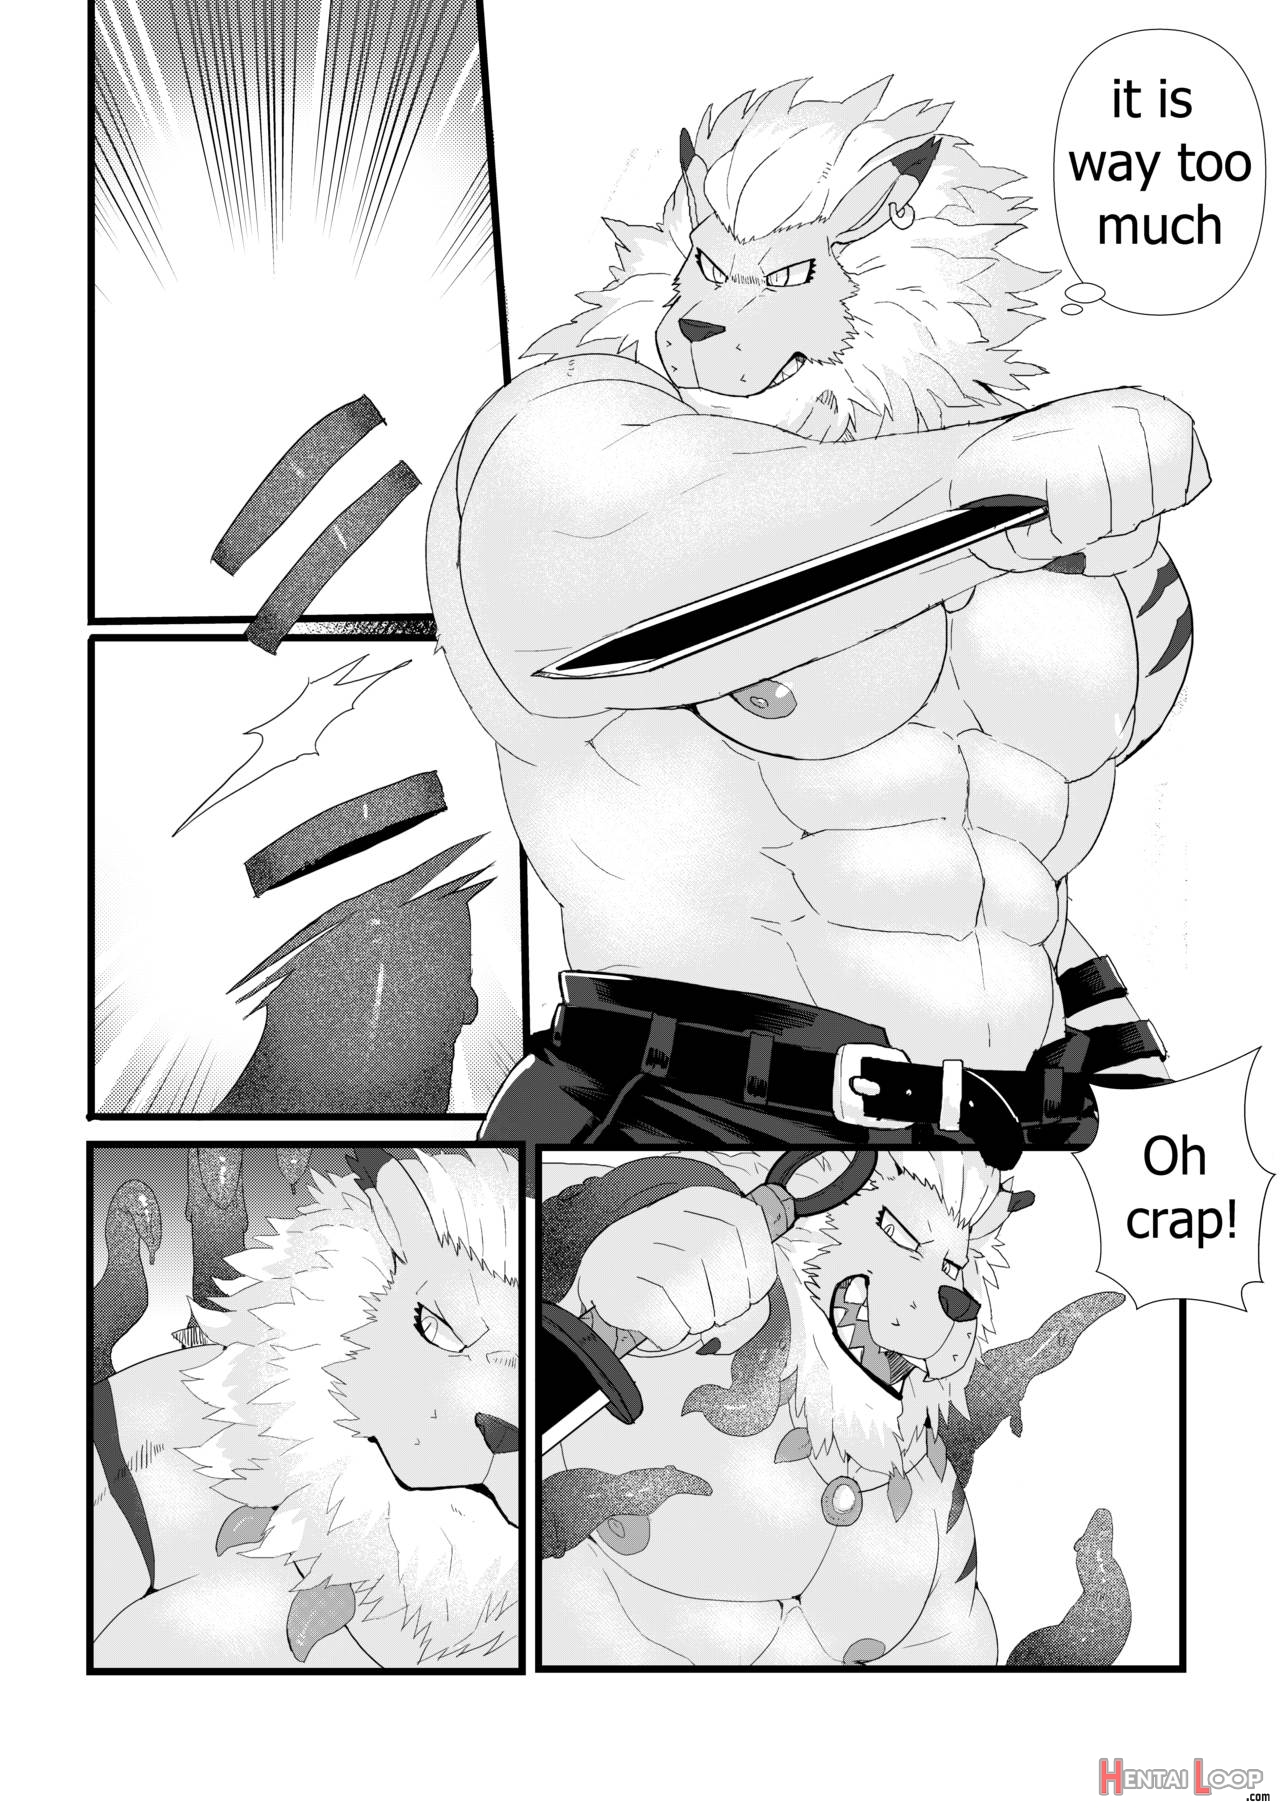 Leomon Gainer With Virus page 1